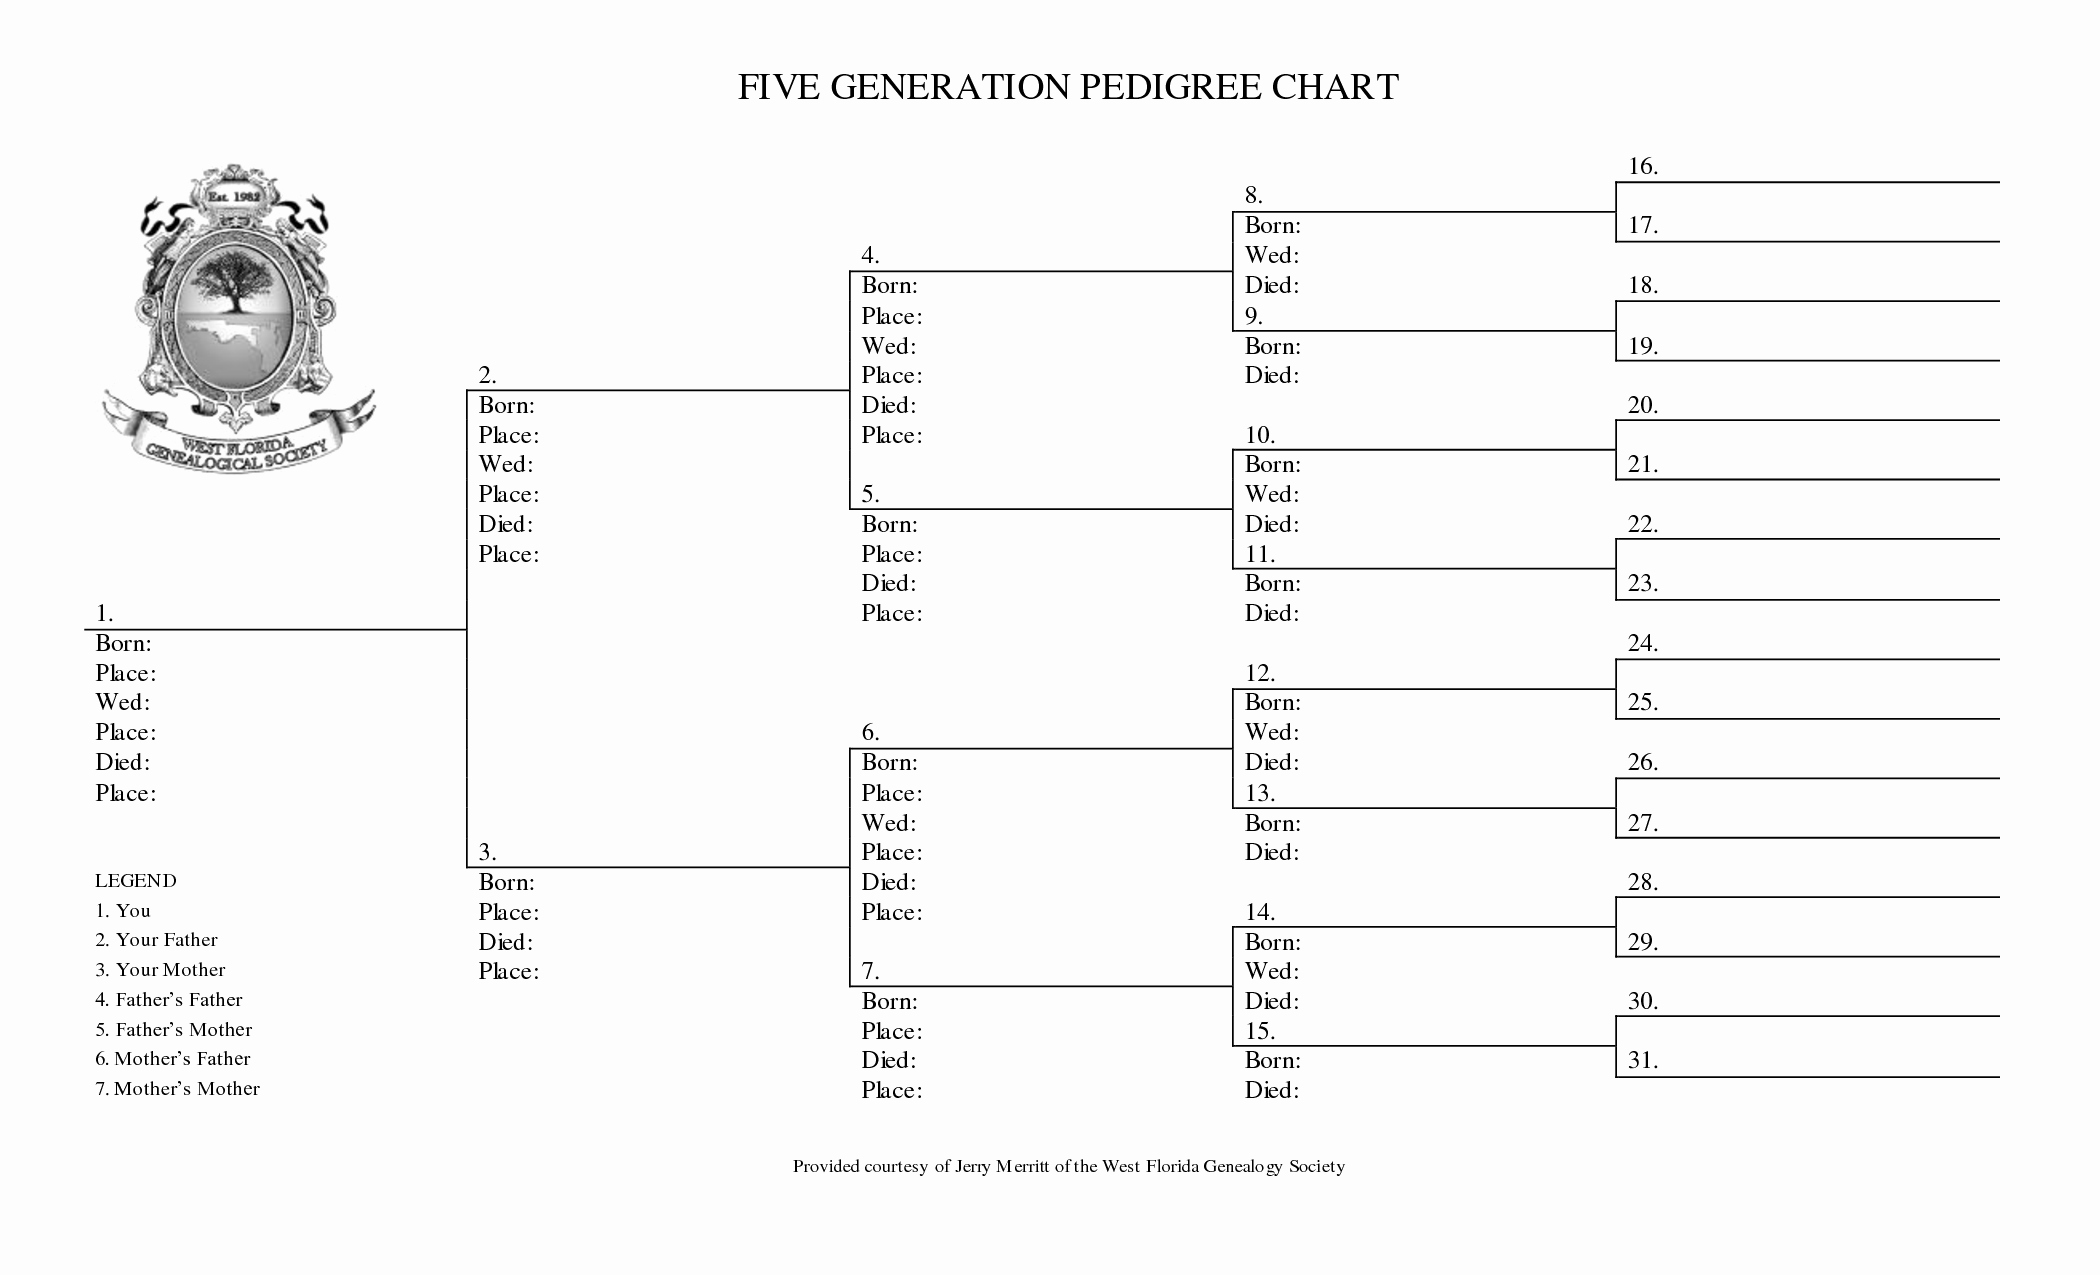 Family Tree Template 5 Generations Best Of 5 Generation Family Tree Outline Bamboodownunder